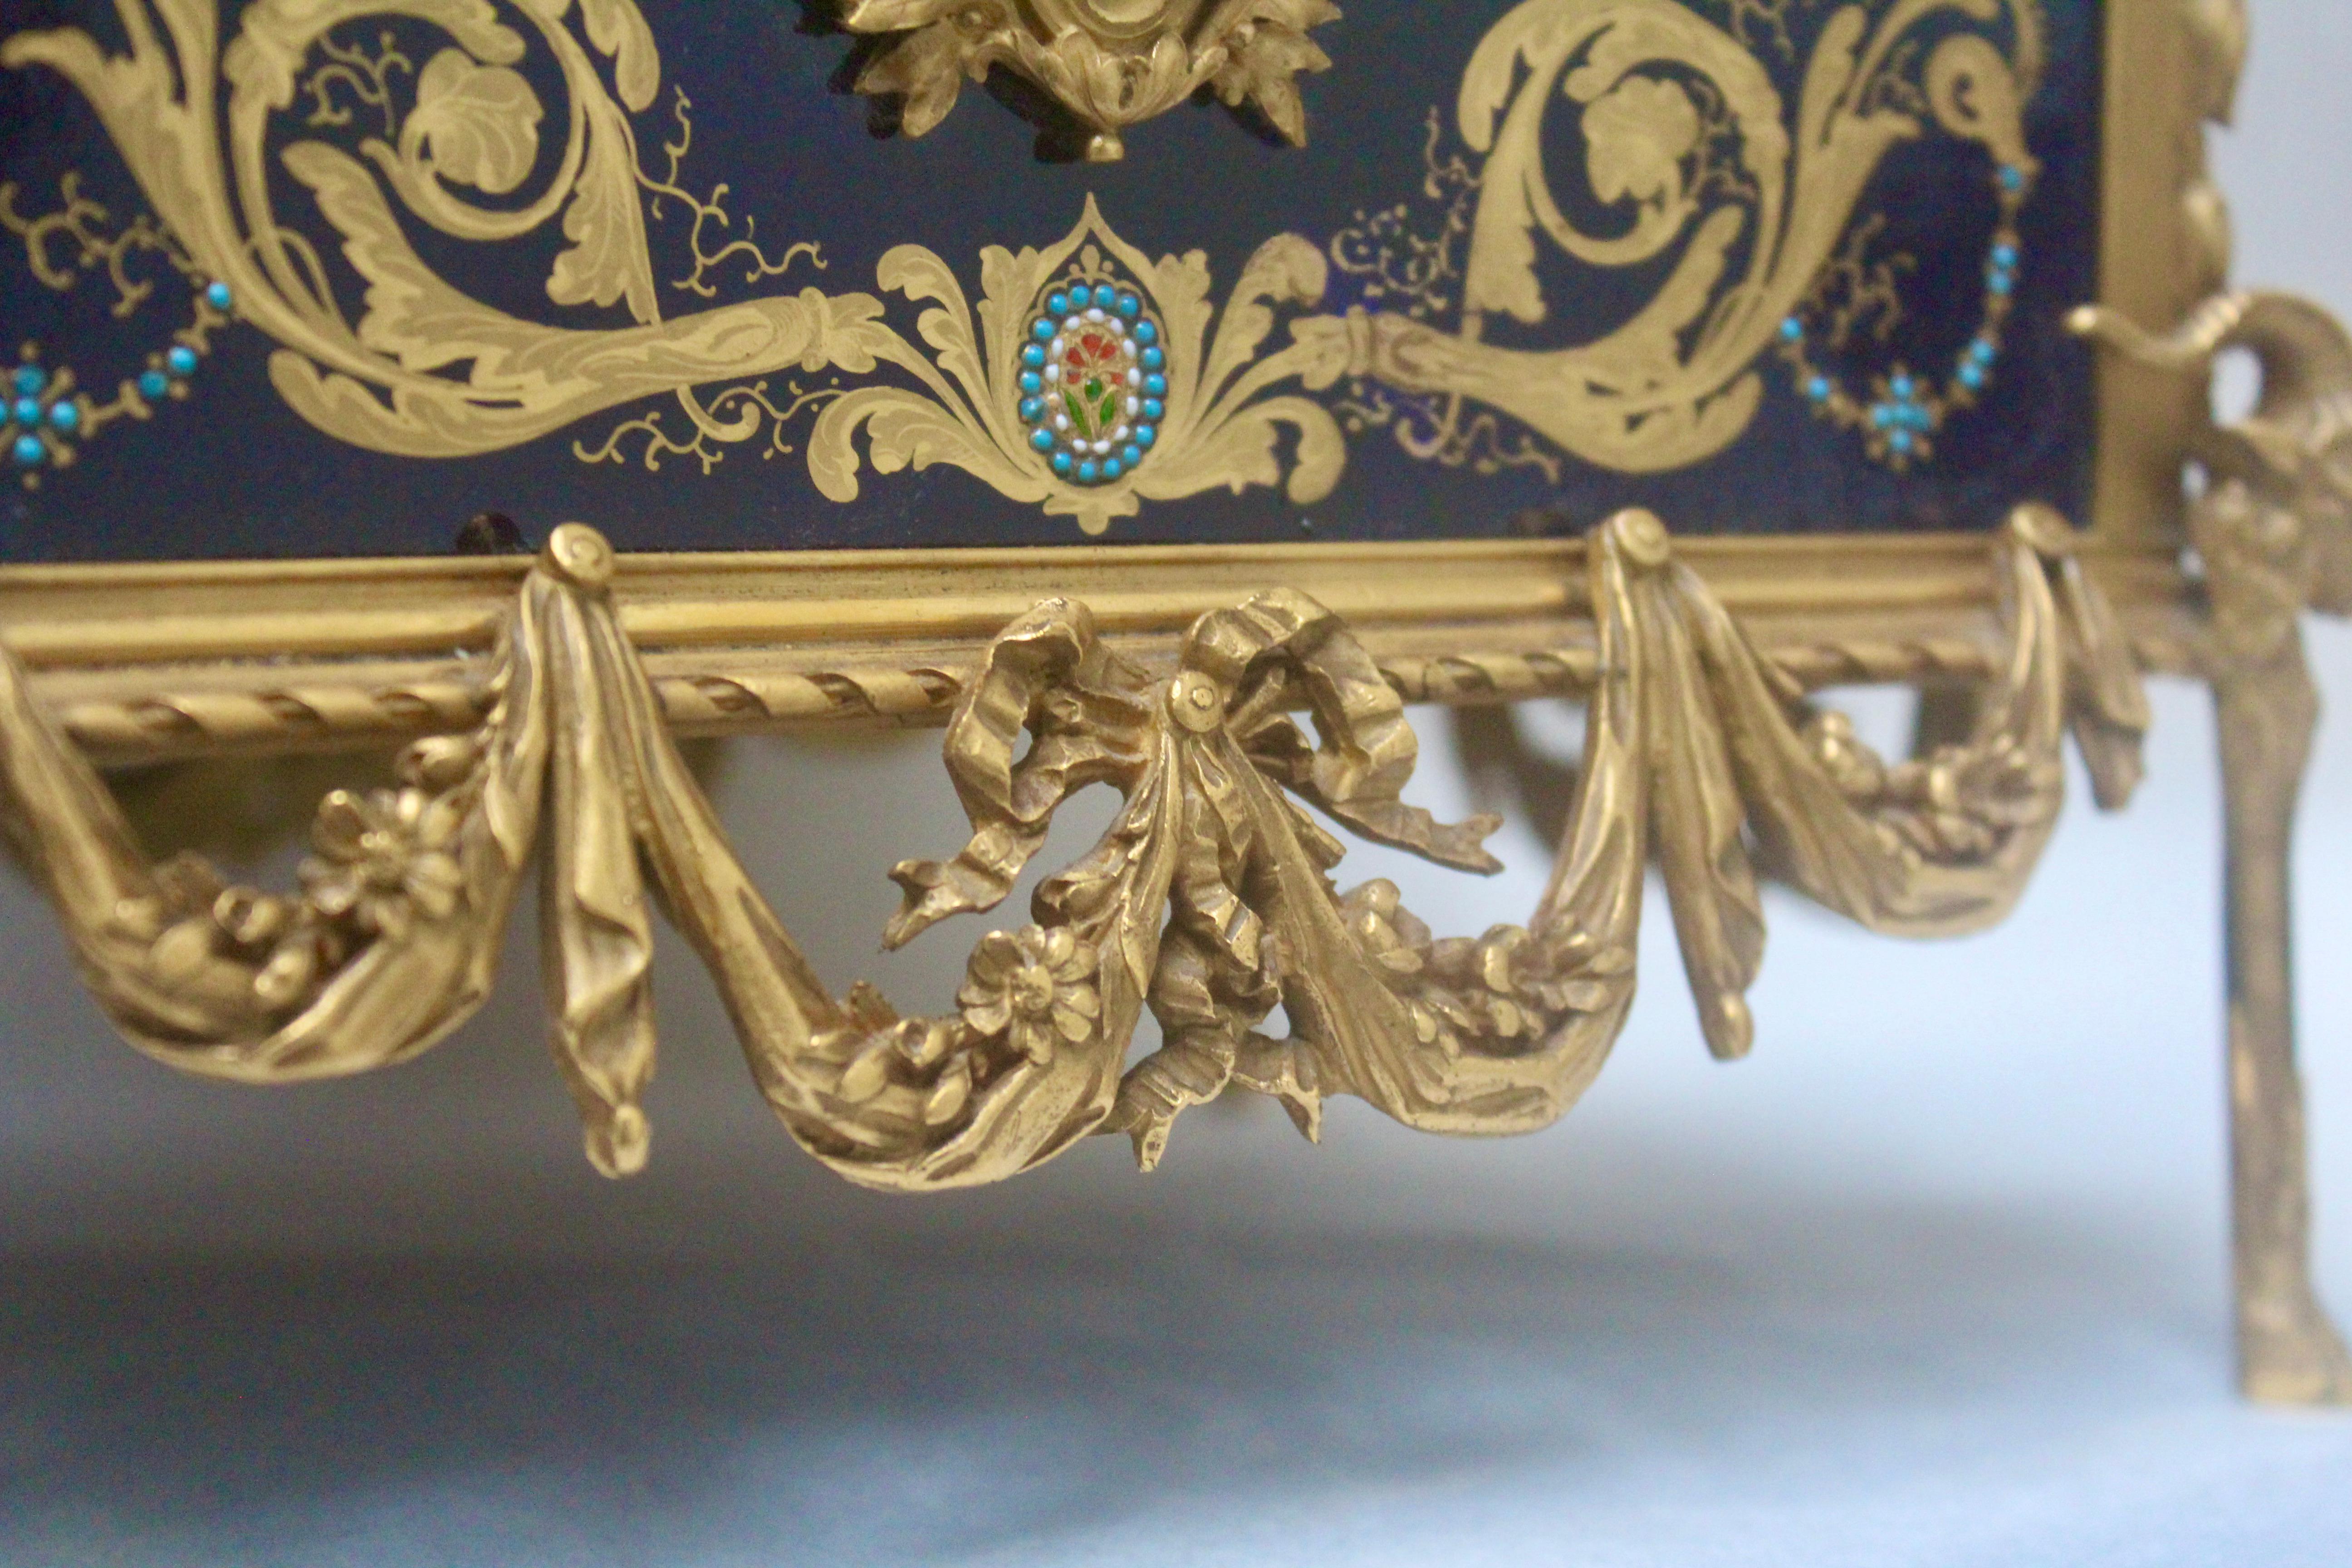 French 19th Century Enameled and Ormolu-Mounted Jewelry Casket 5